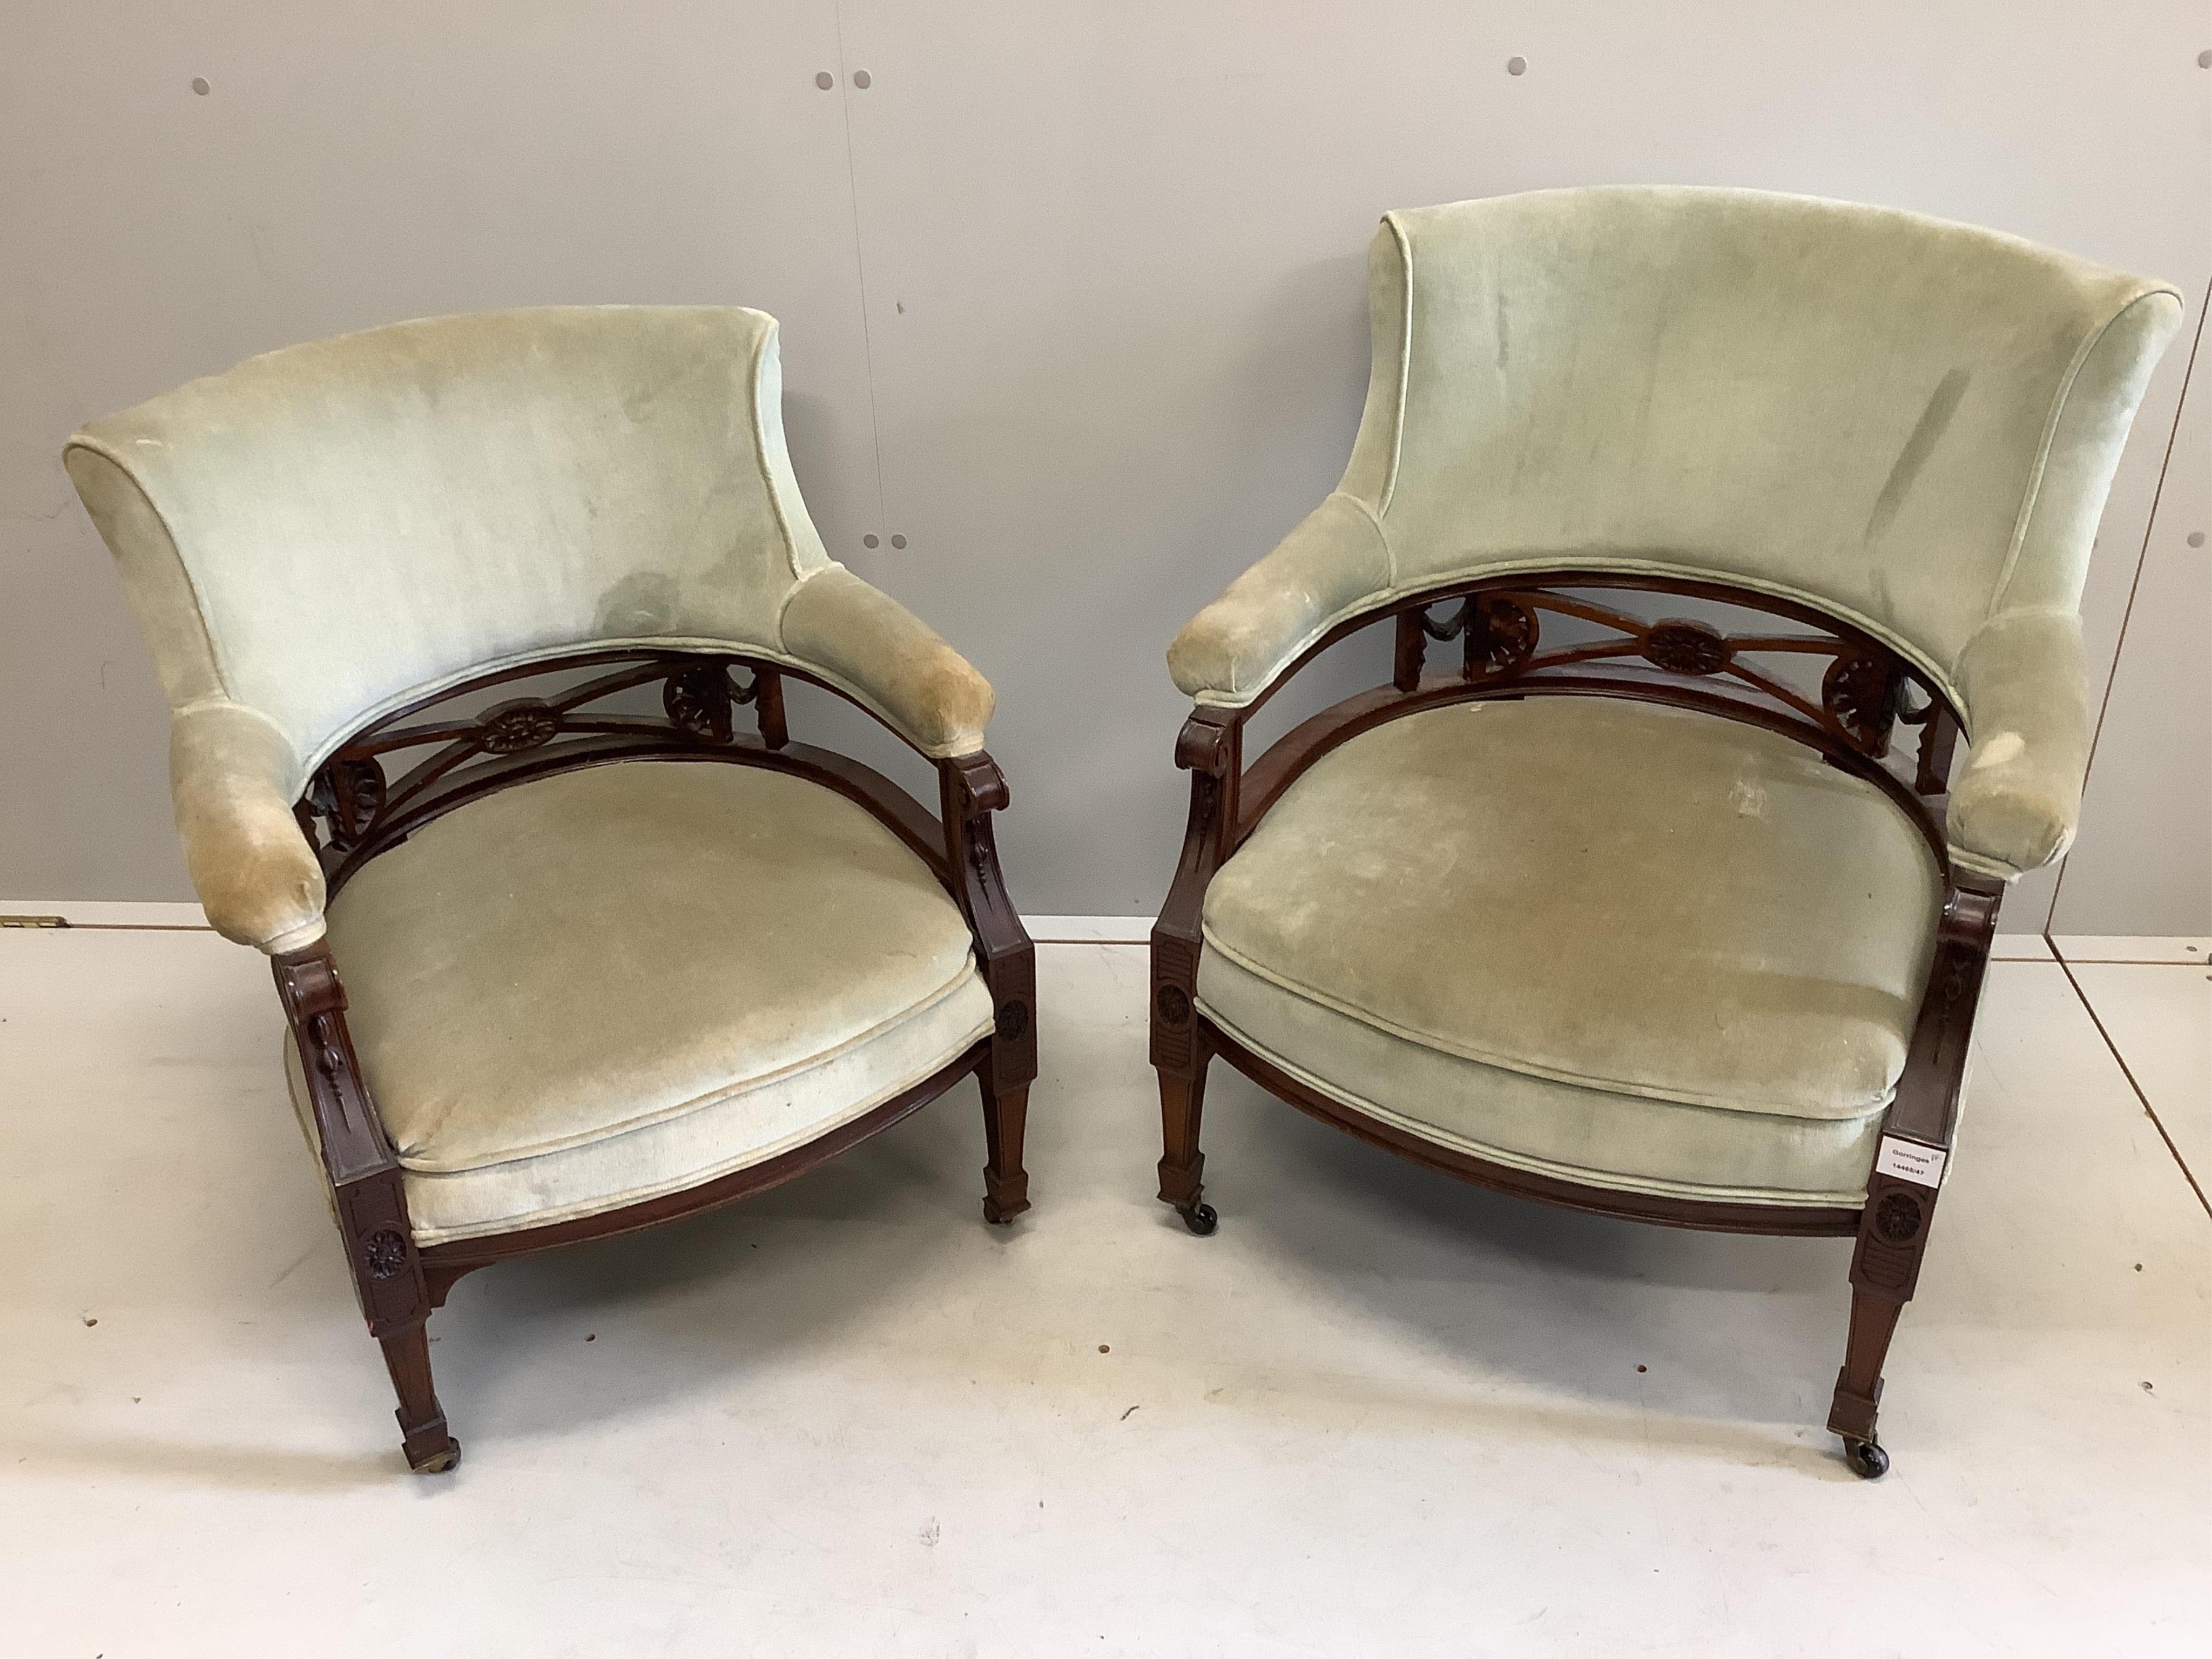 Two Victorian upholstered mahogany tub armchairs, larger width 65cm, depth 56cm, height 80cm. Condition - fair